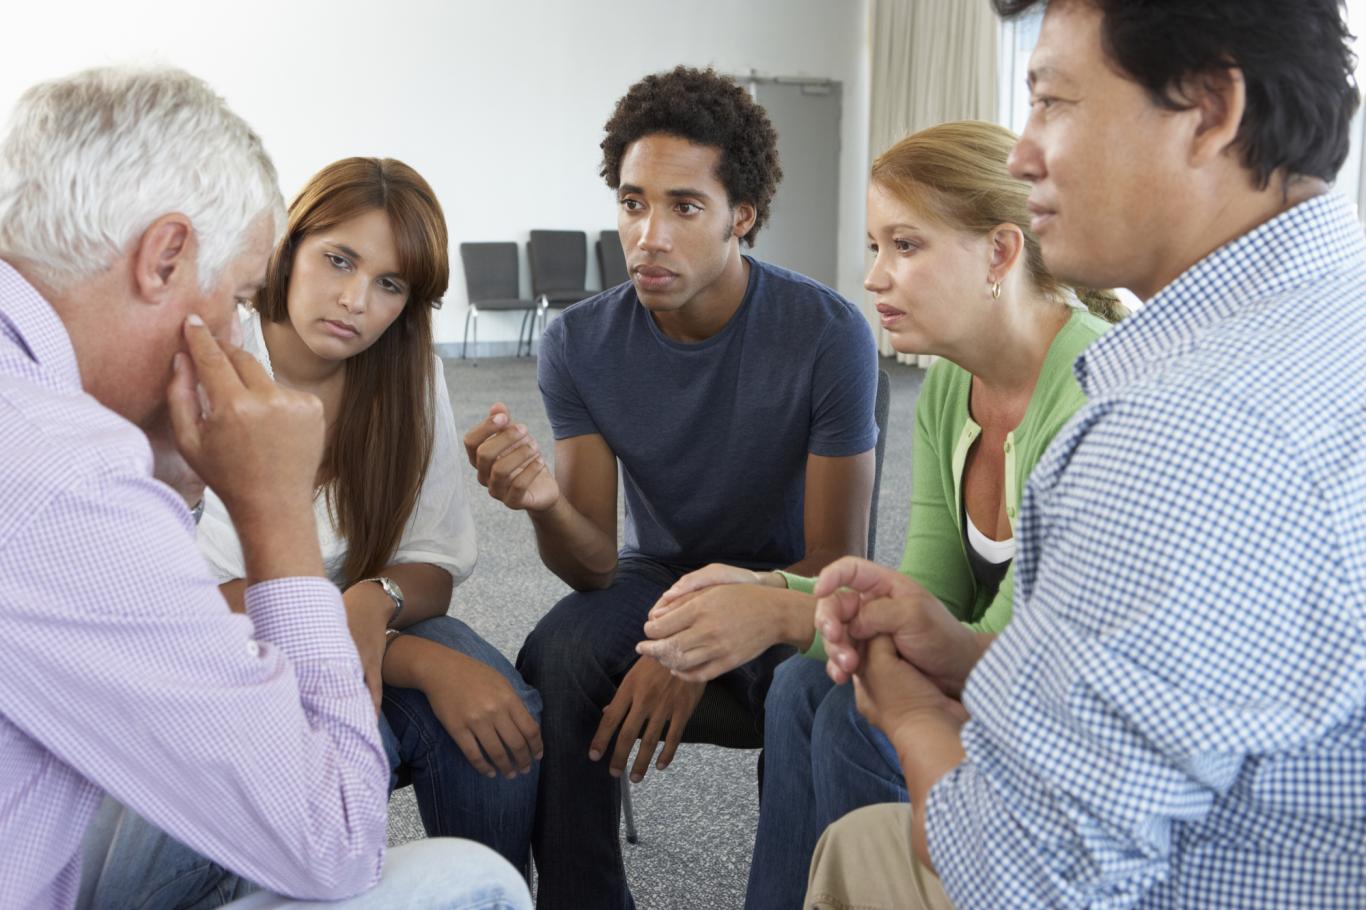 Group counselling